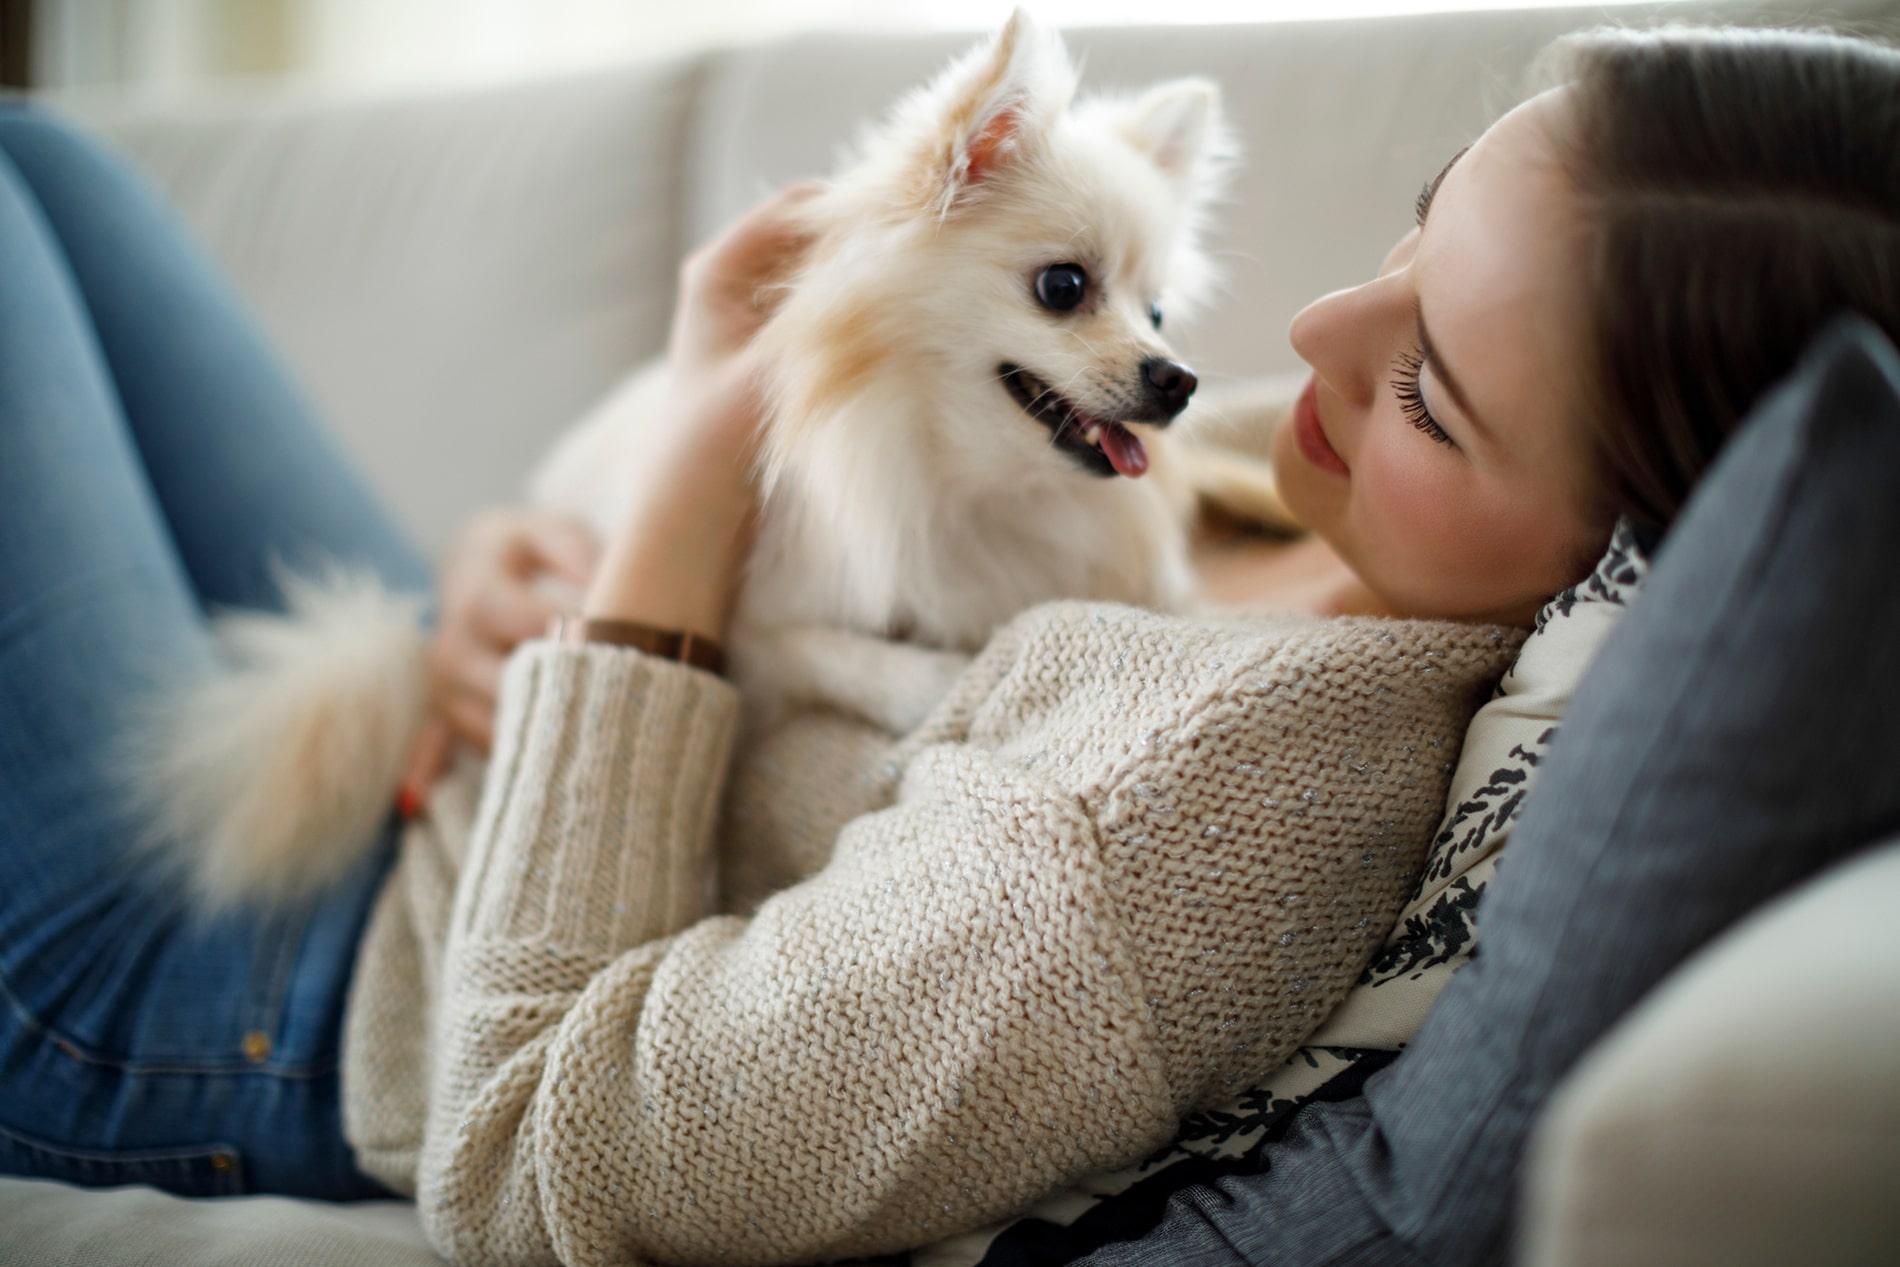 Woman on couch with small white dog